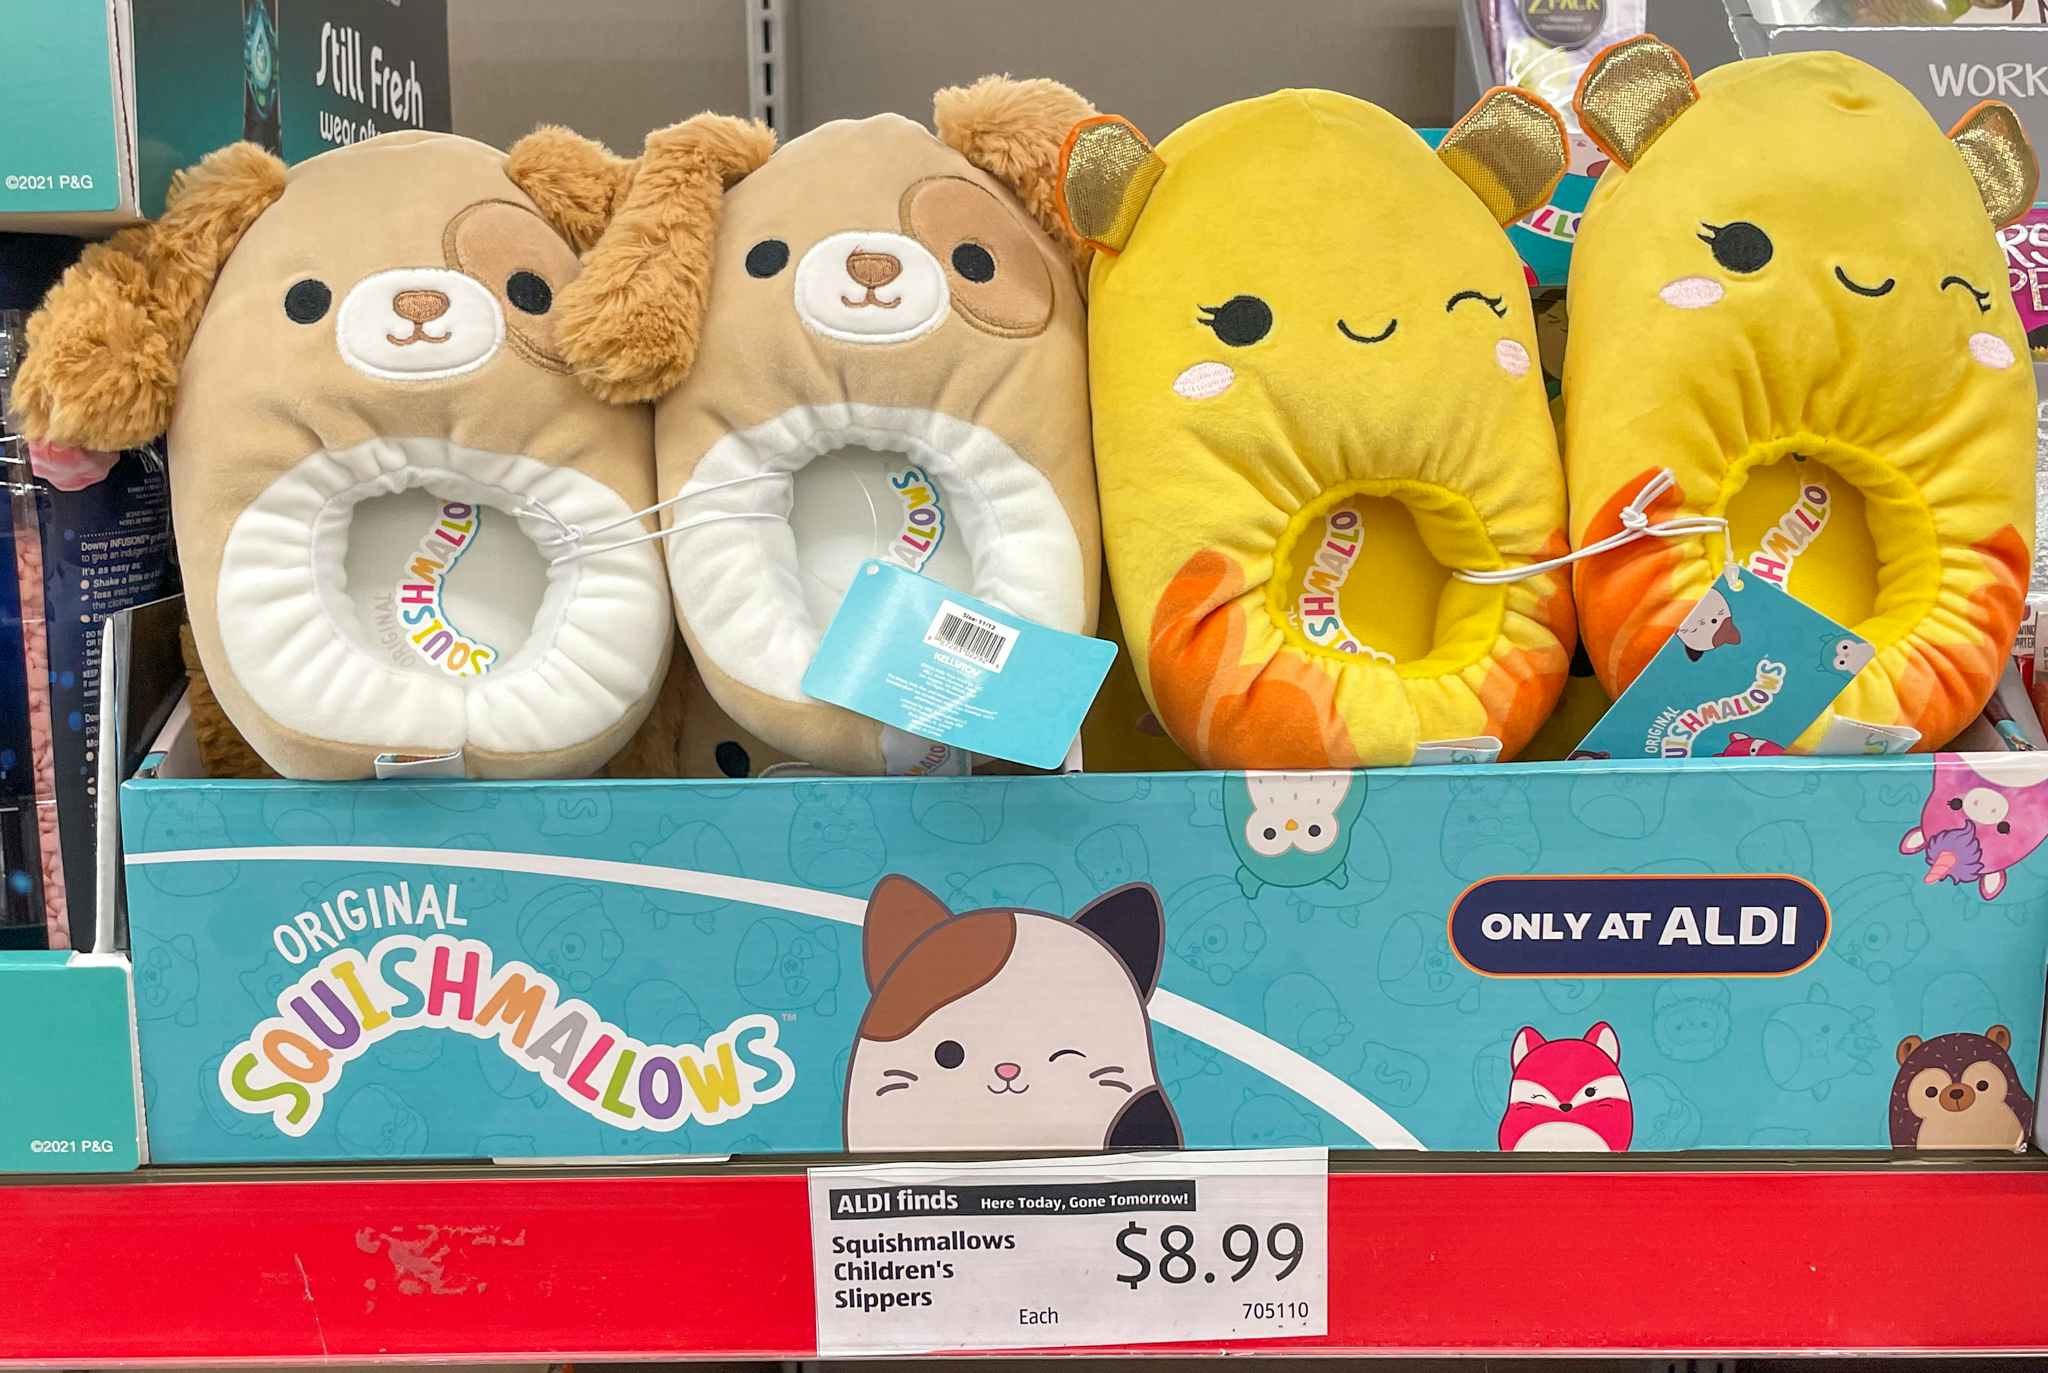 squishmallows slippers with sale sign at aldi